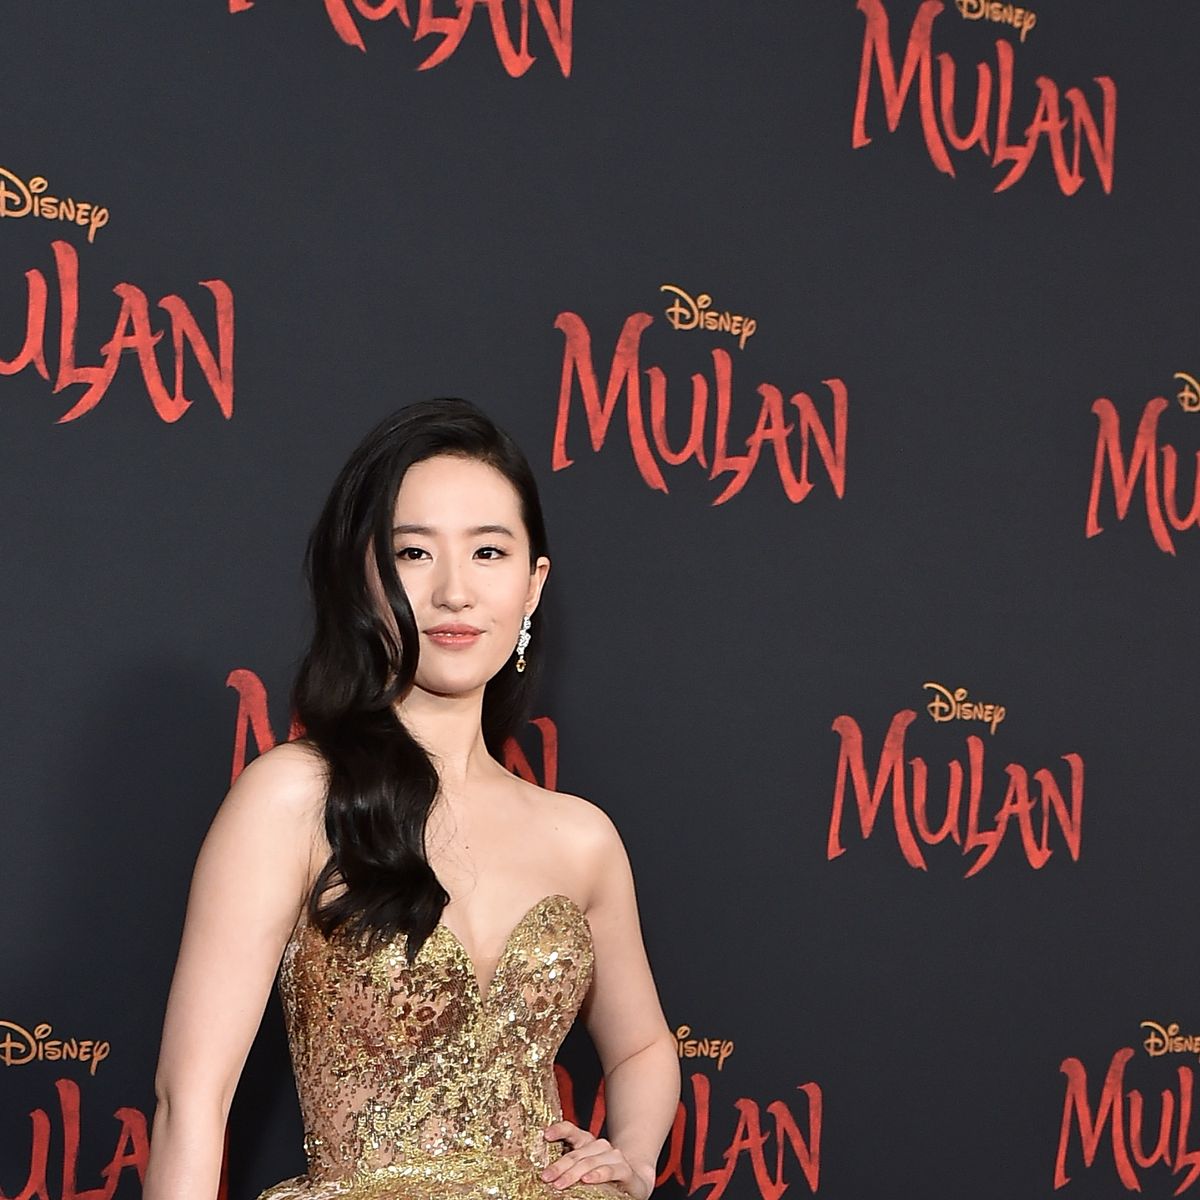 What do you think of Louis Vuitton official announced that Liu Yifei (Mulan  actress) has become the brand global ambassador? - Quora